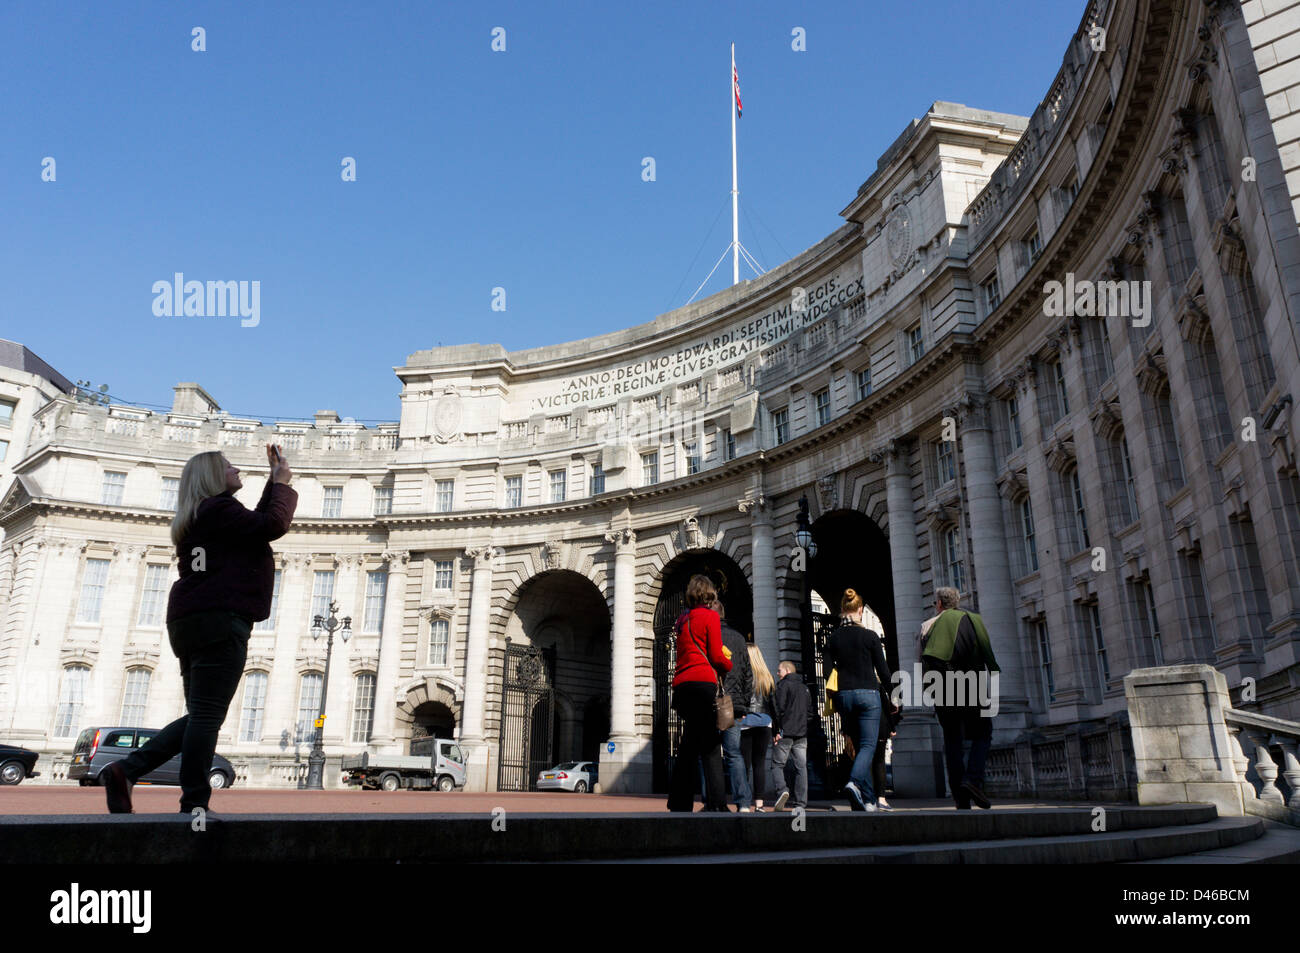 Tourist photographing Admiralty Arch with a mobile 'phone camera, London. Stock Photo